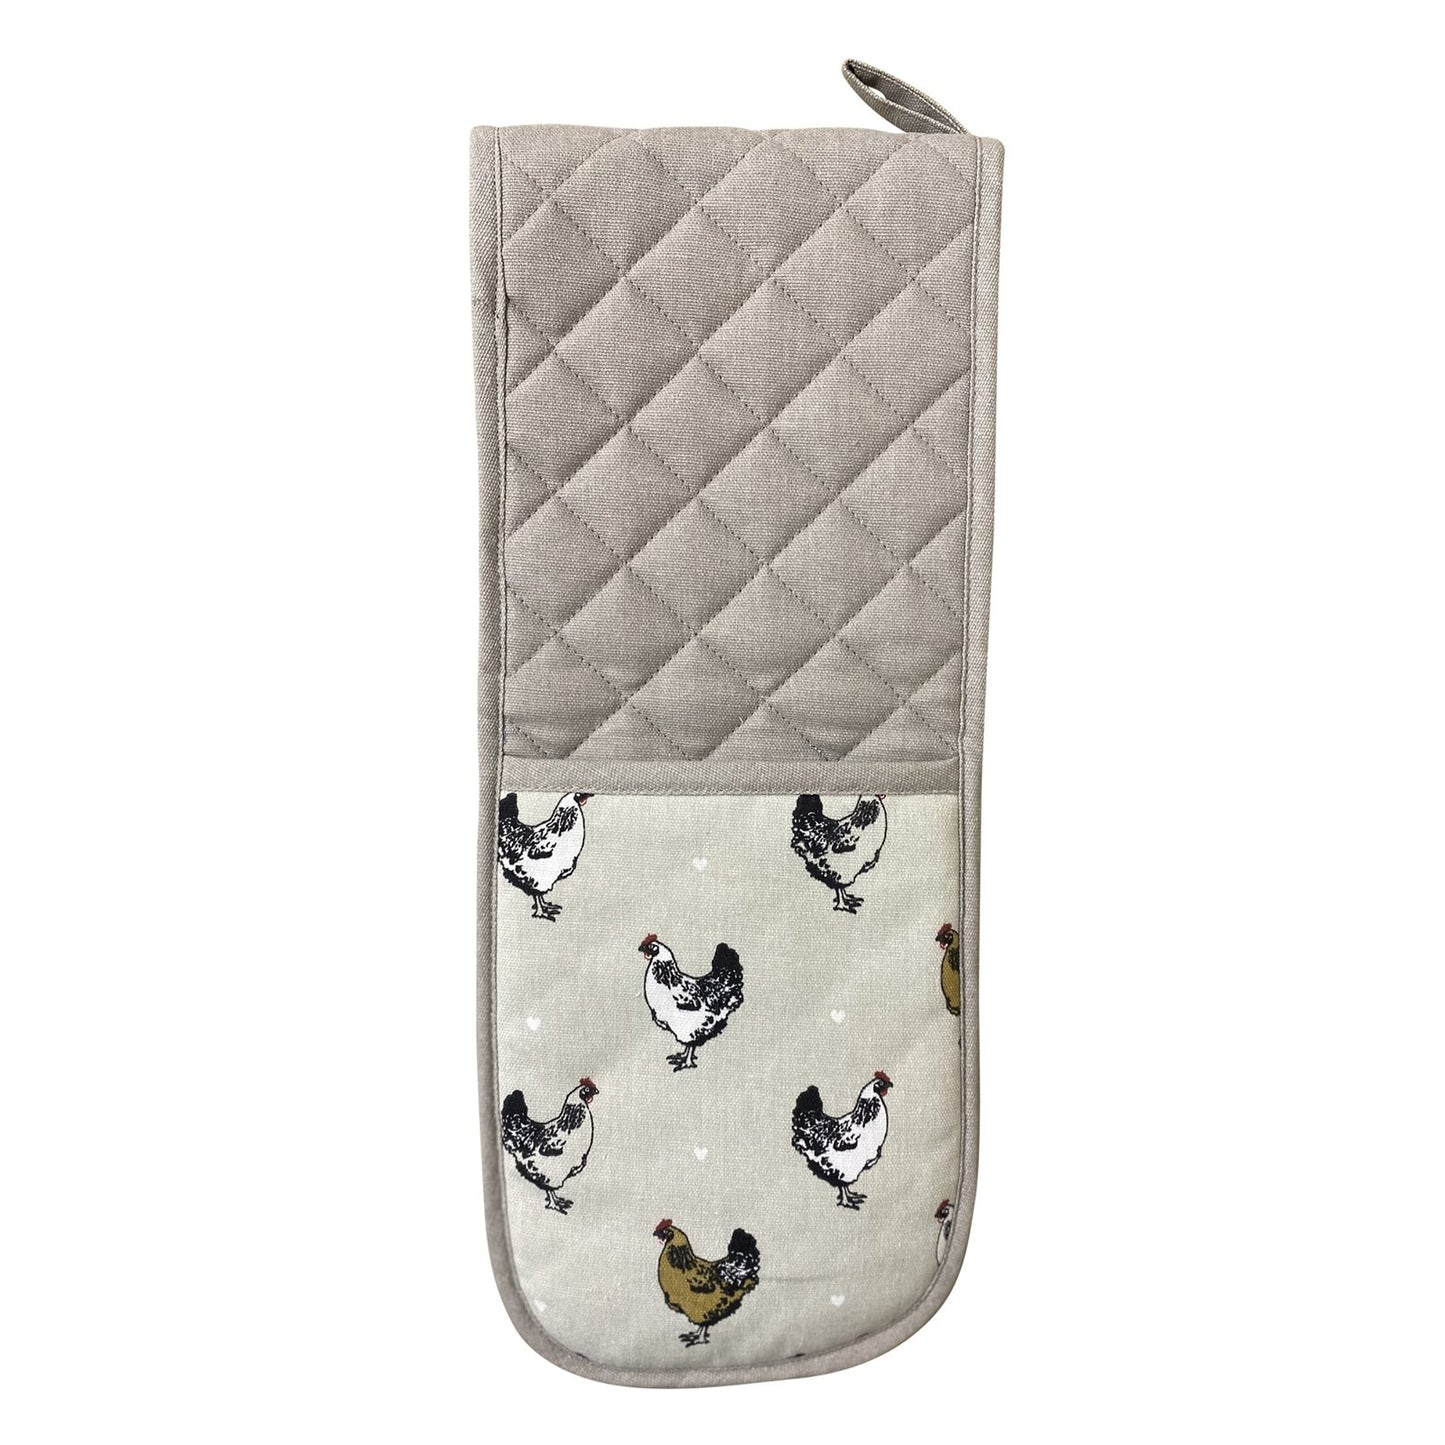 Double Oven Glove With A Chicken Print Design - Kaftan direct